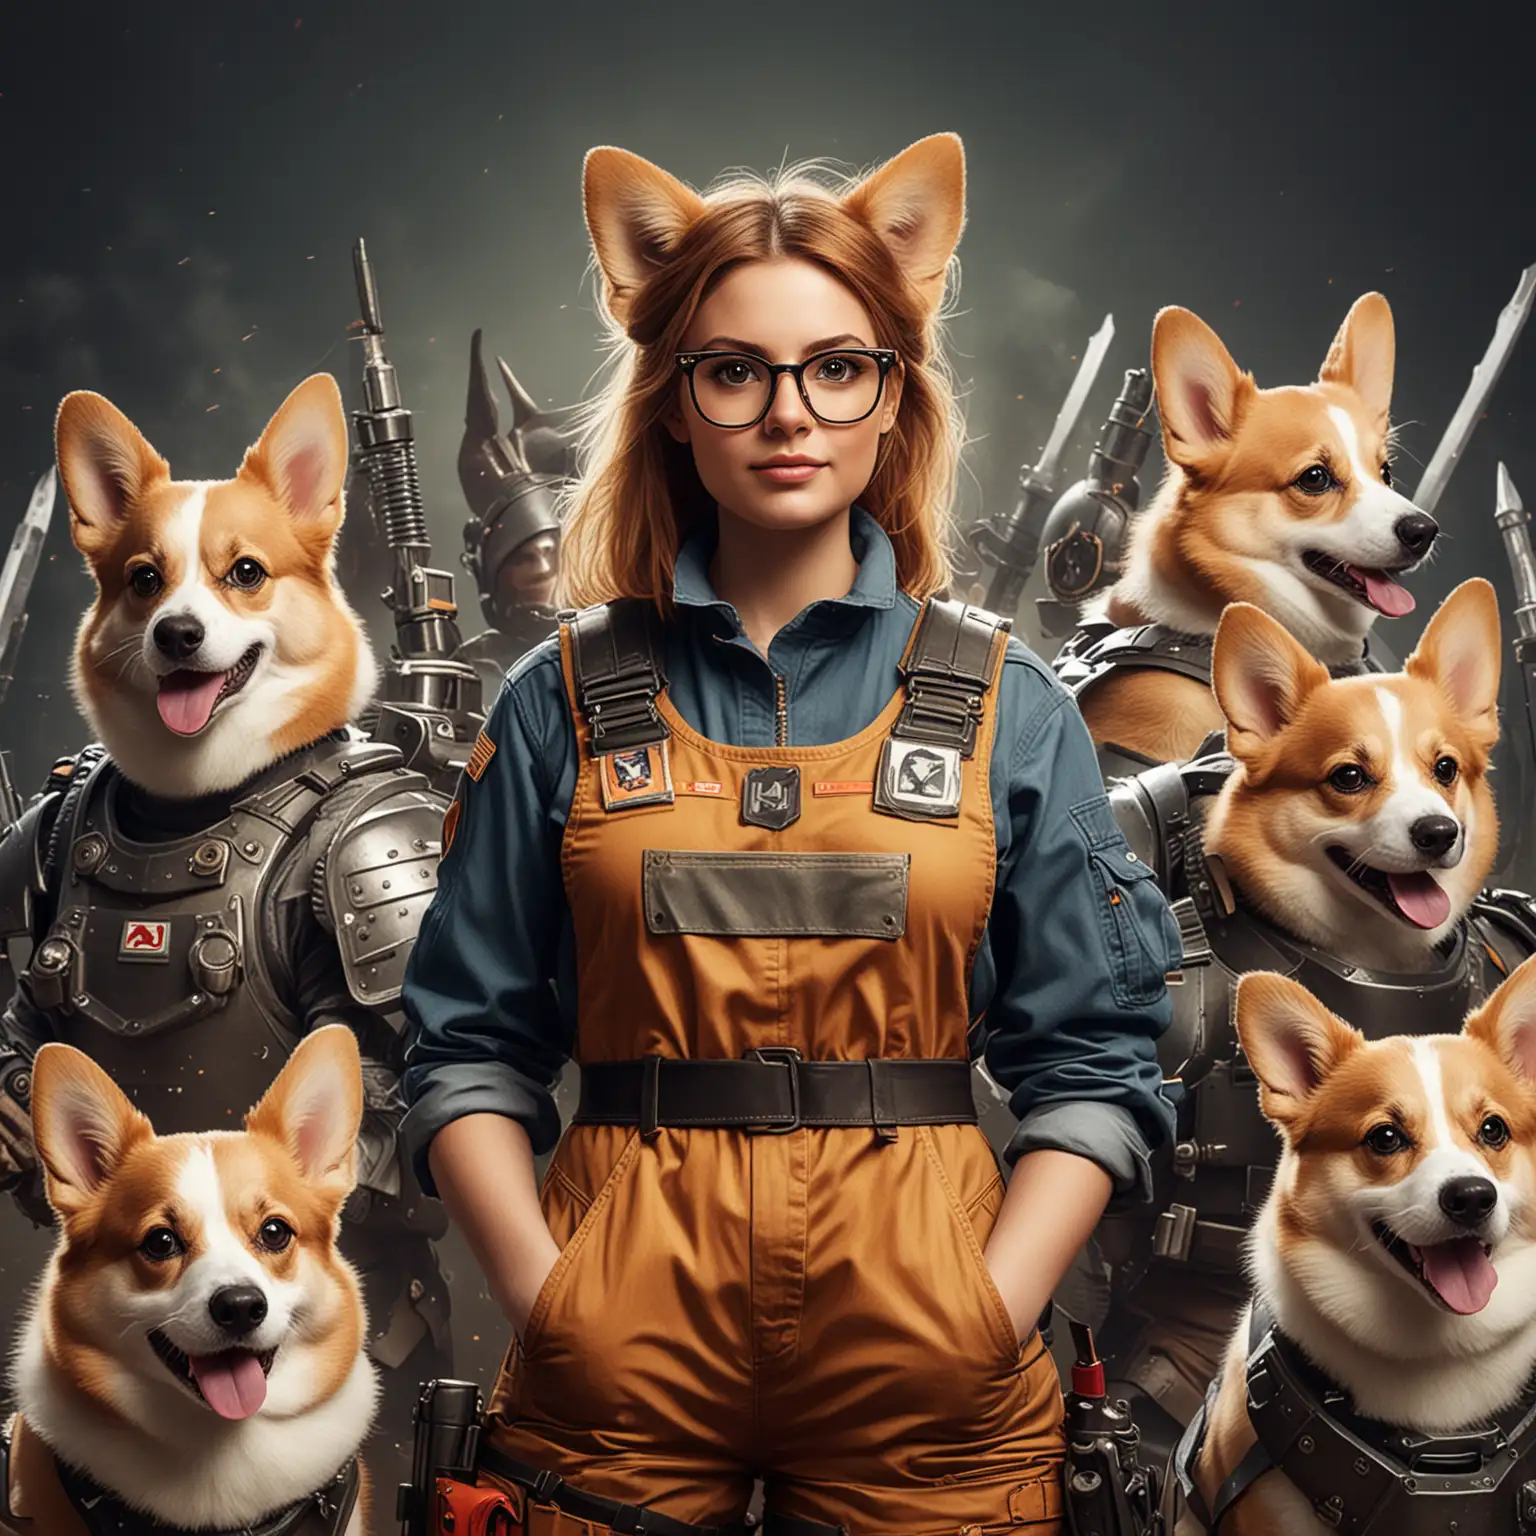 Female Warrior in Spectacles Surrounded by Corgis in Armor